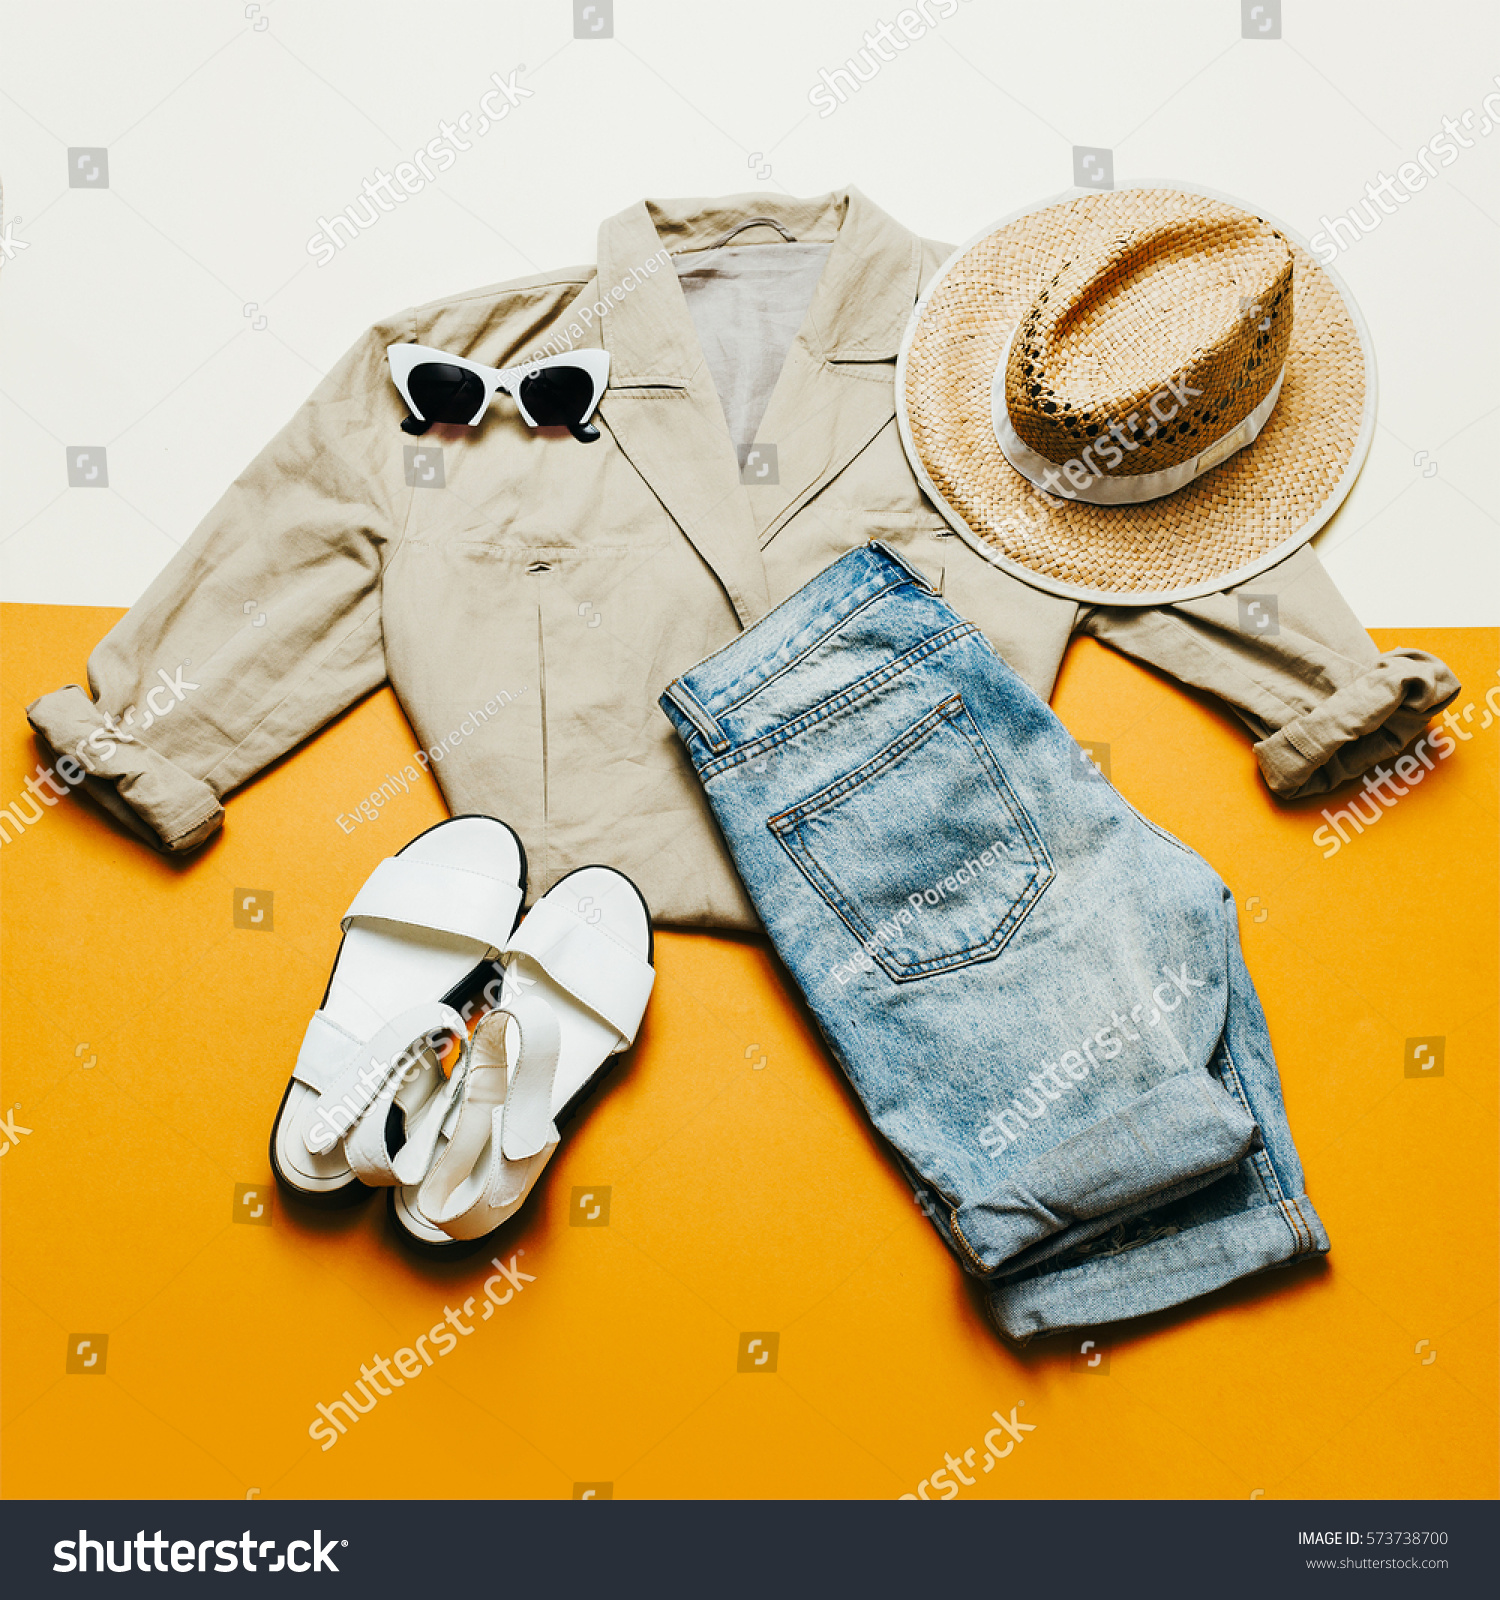 Summer Outfit Shorts Hat Safari Style Stock Photo 573738700 | Shutterstock